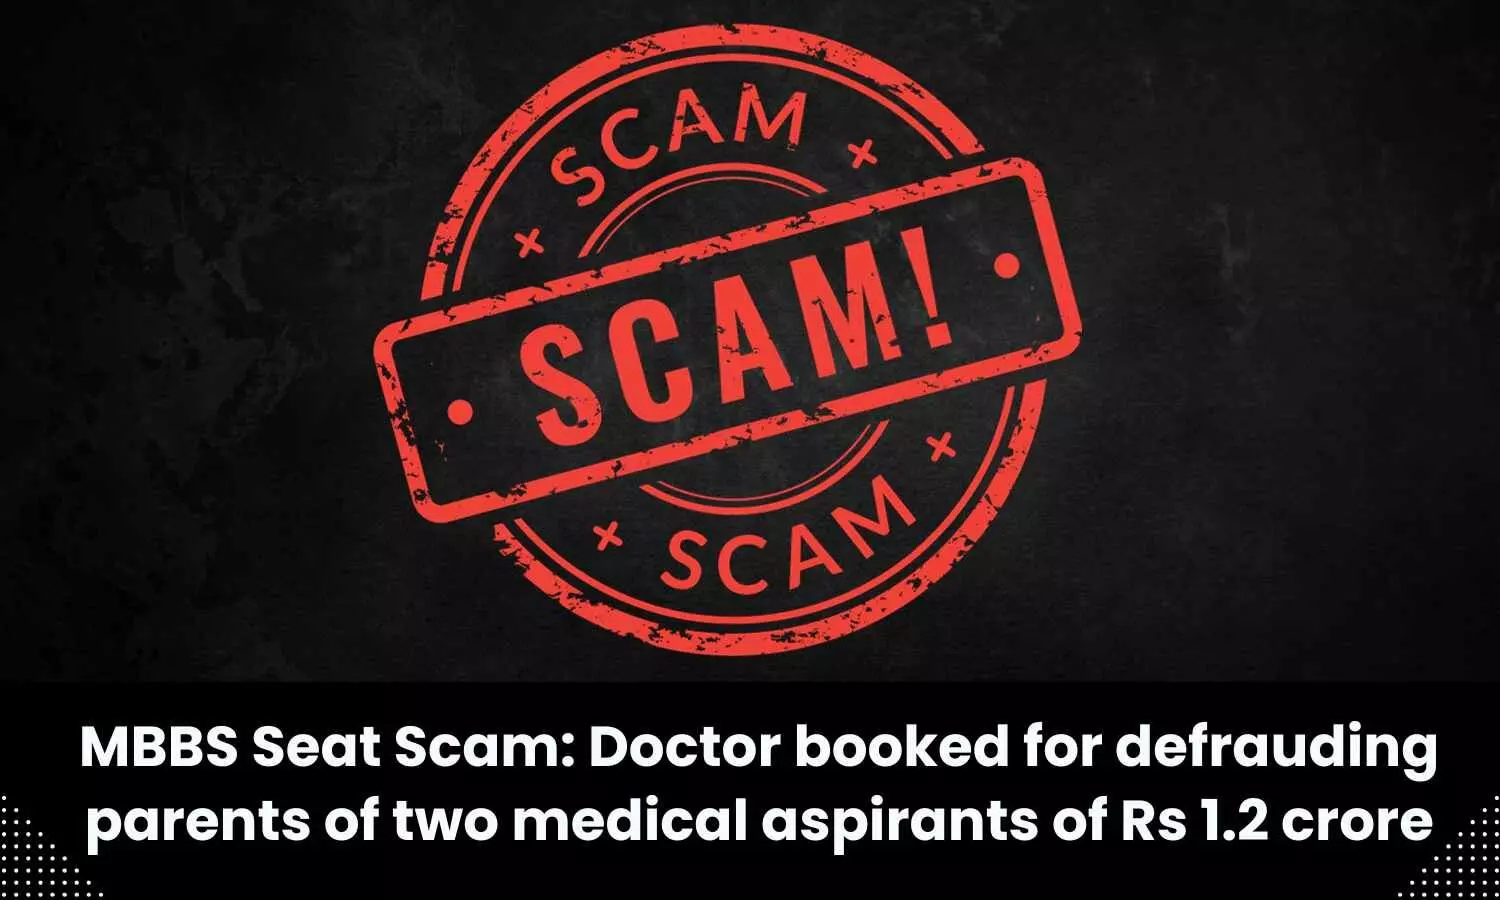 Promise of MBBS Seat: Doctor booked for defrauding parents of two medical aspirants of Rs 1.2 crore